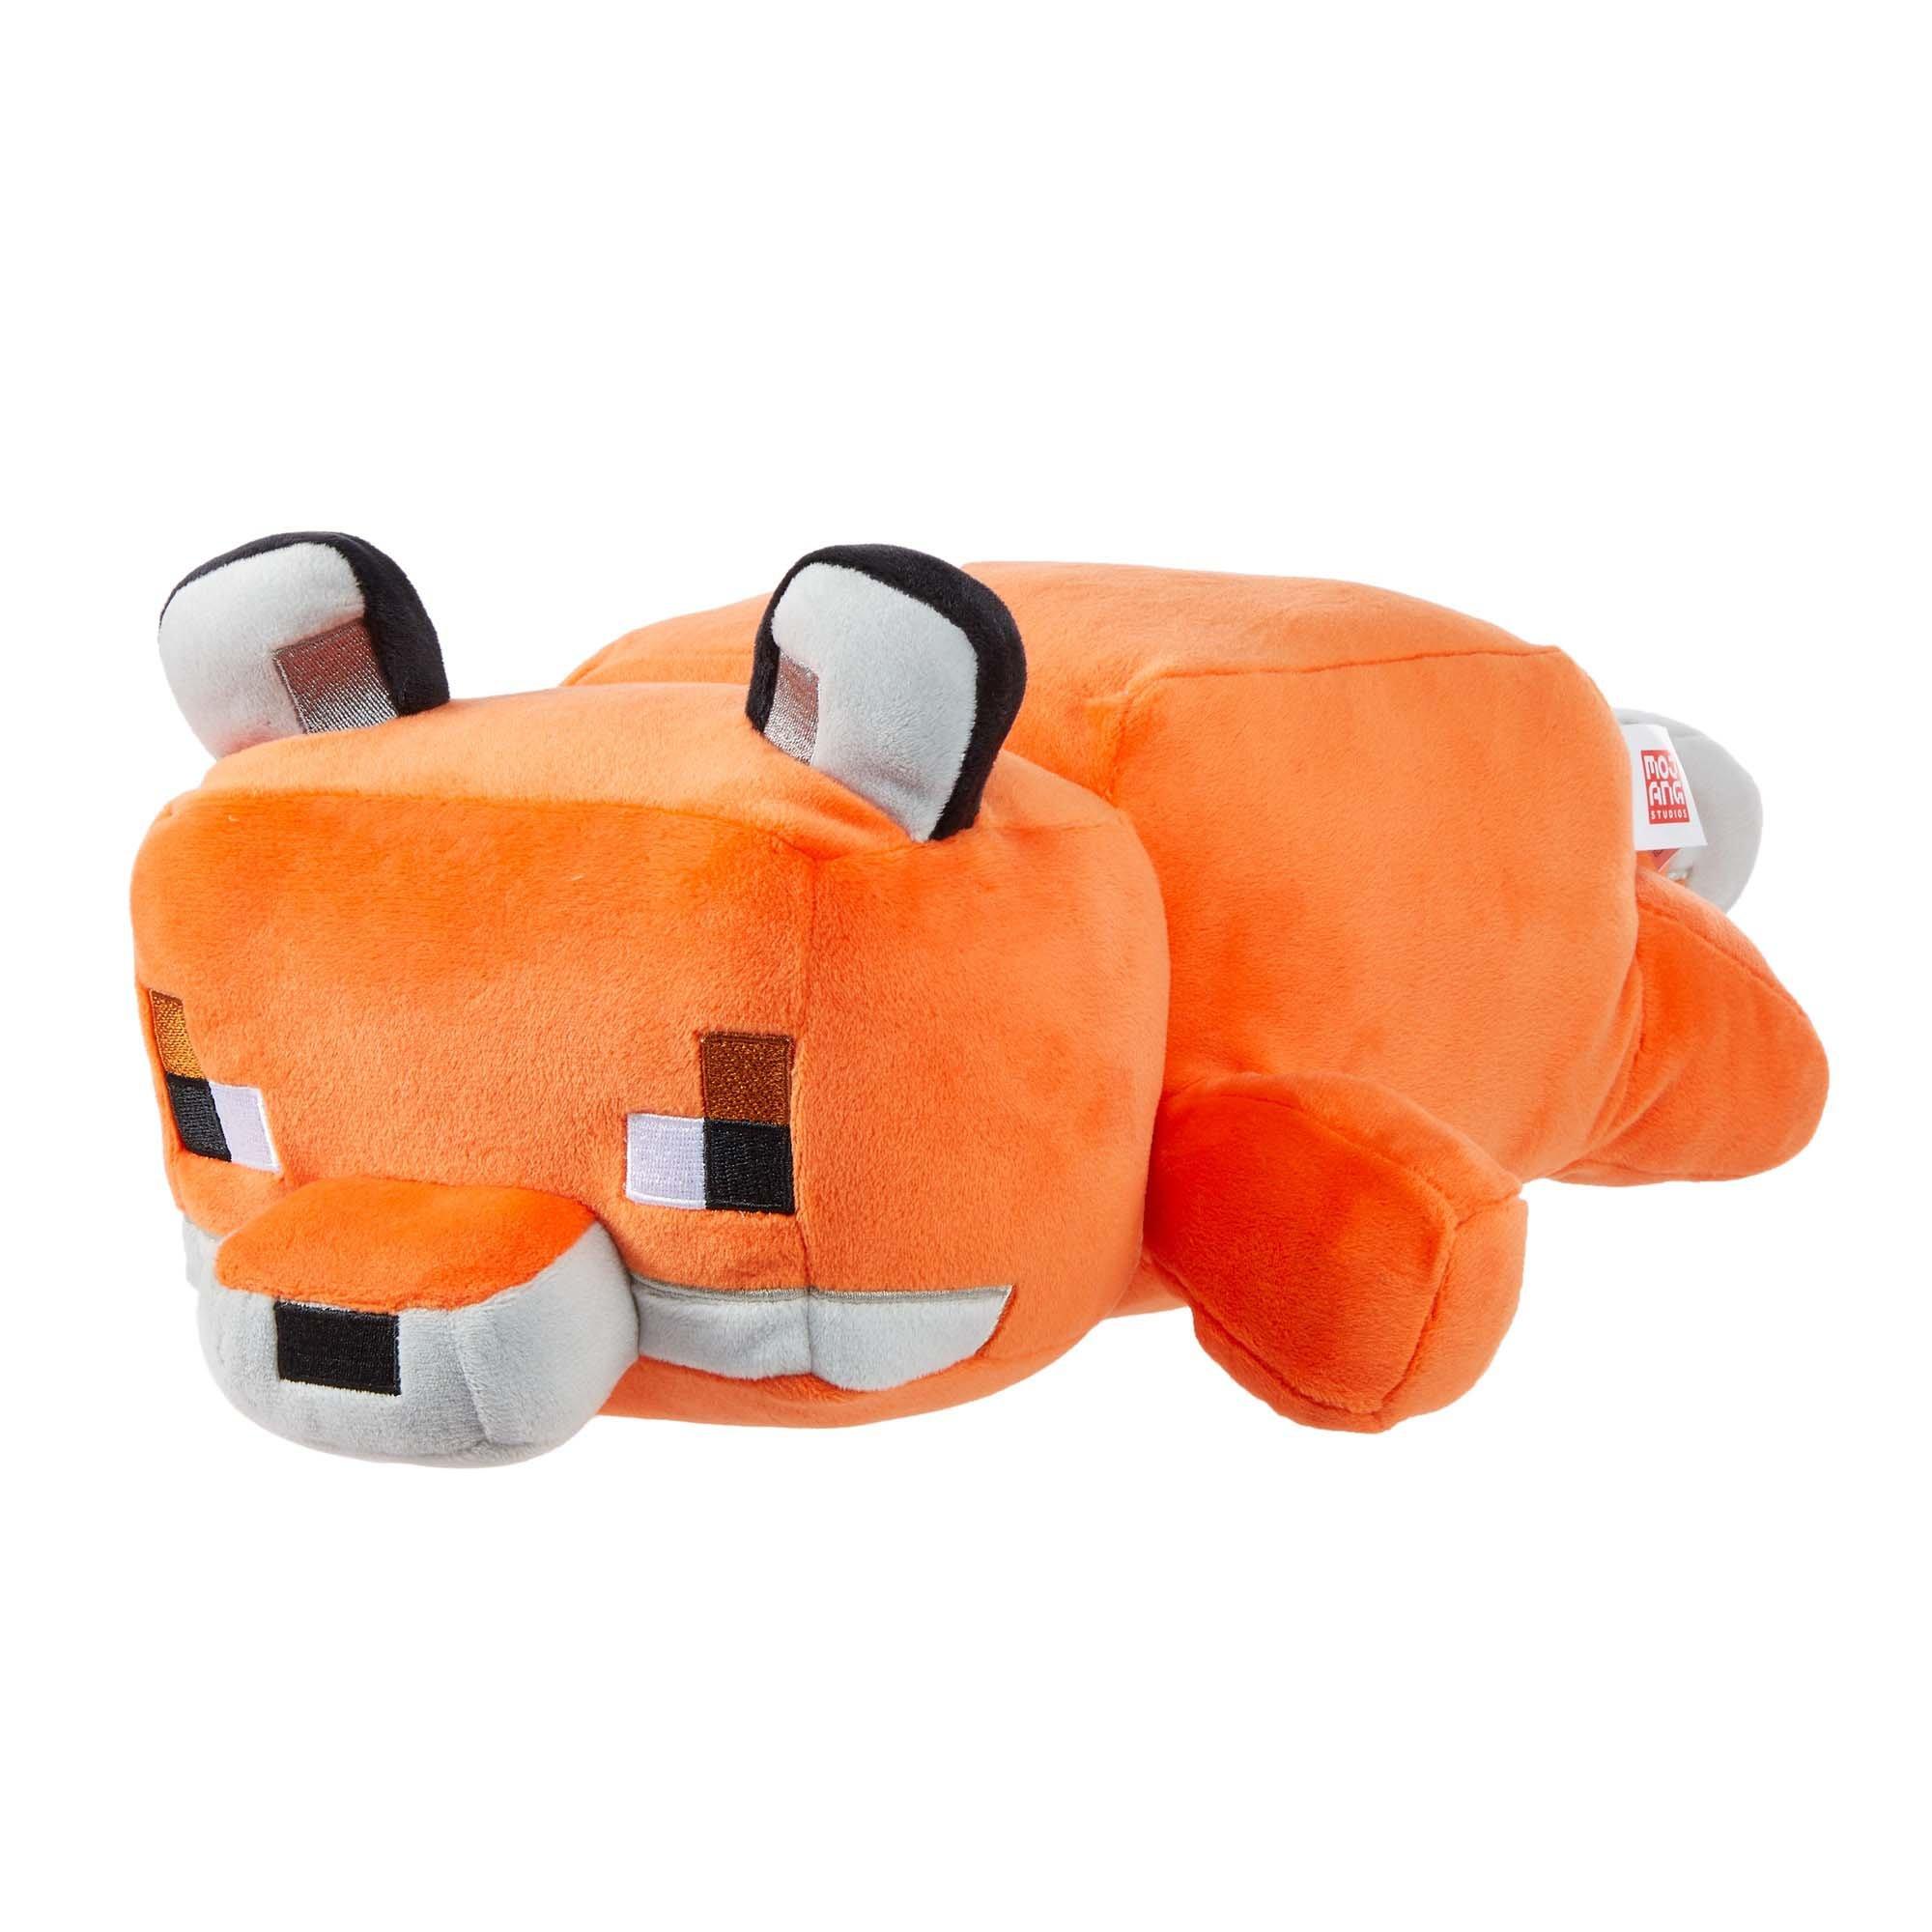 Floppy Collectible Gift for Fans Age 3 Years and Older Soft Squishy Mattel Minecraft Plush Fox 12-in Long Character Doll 